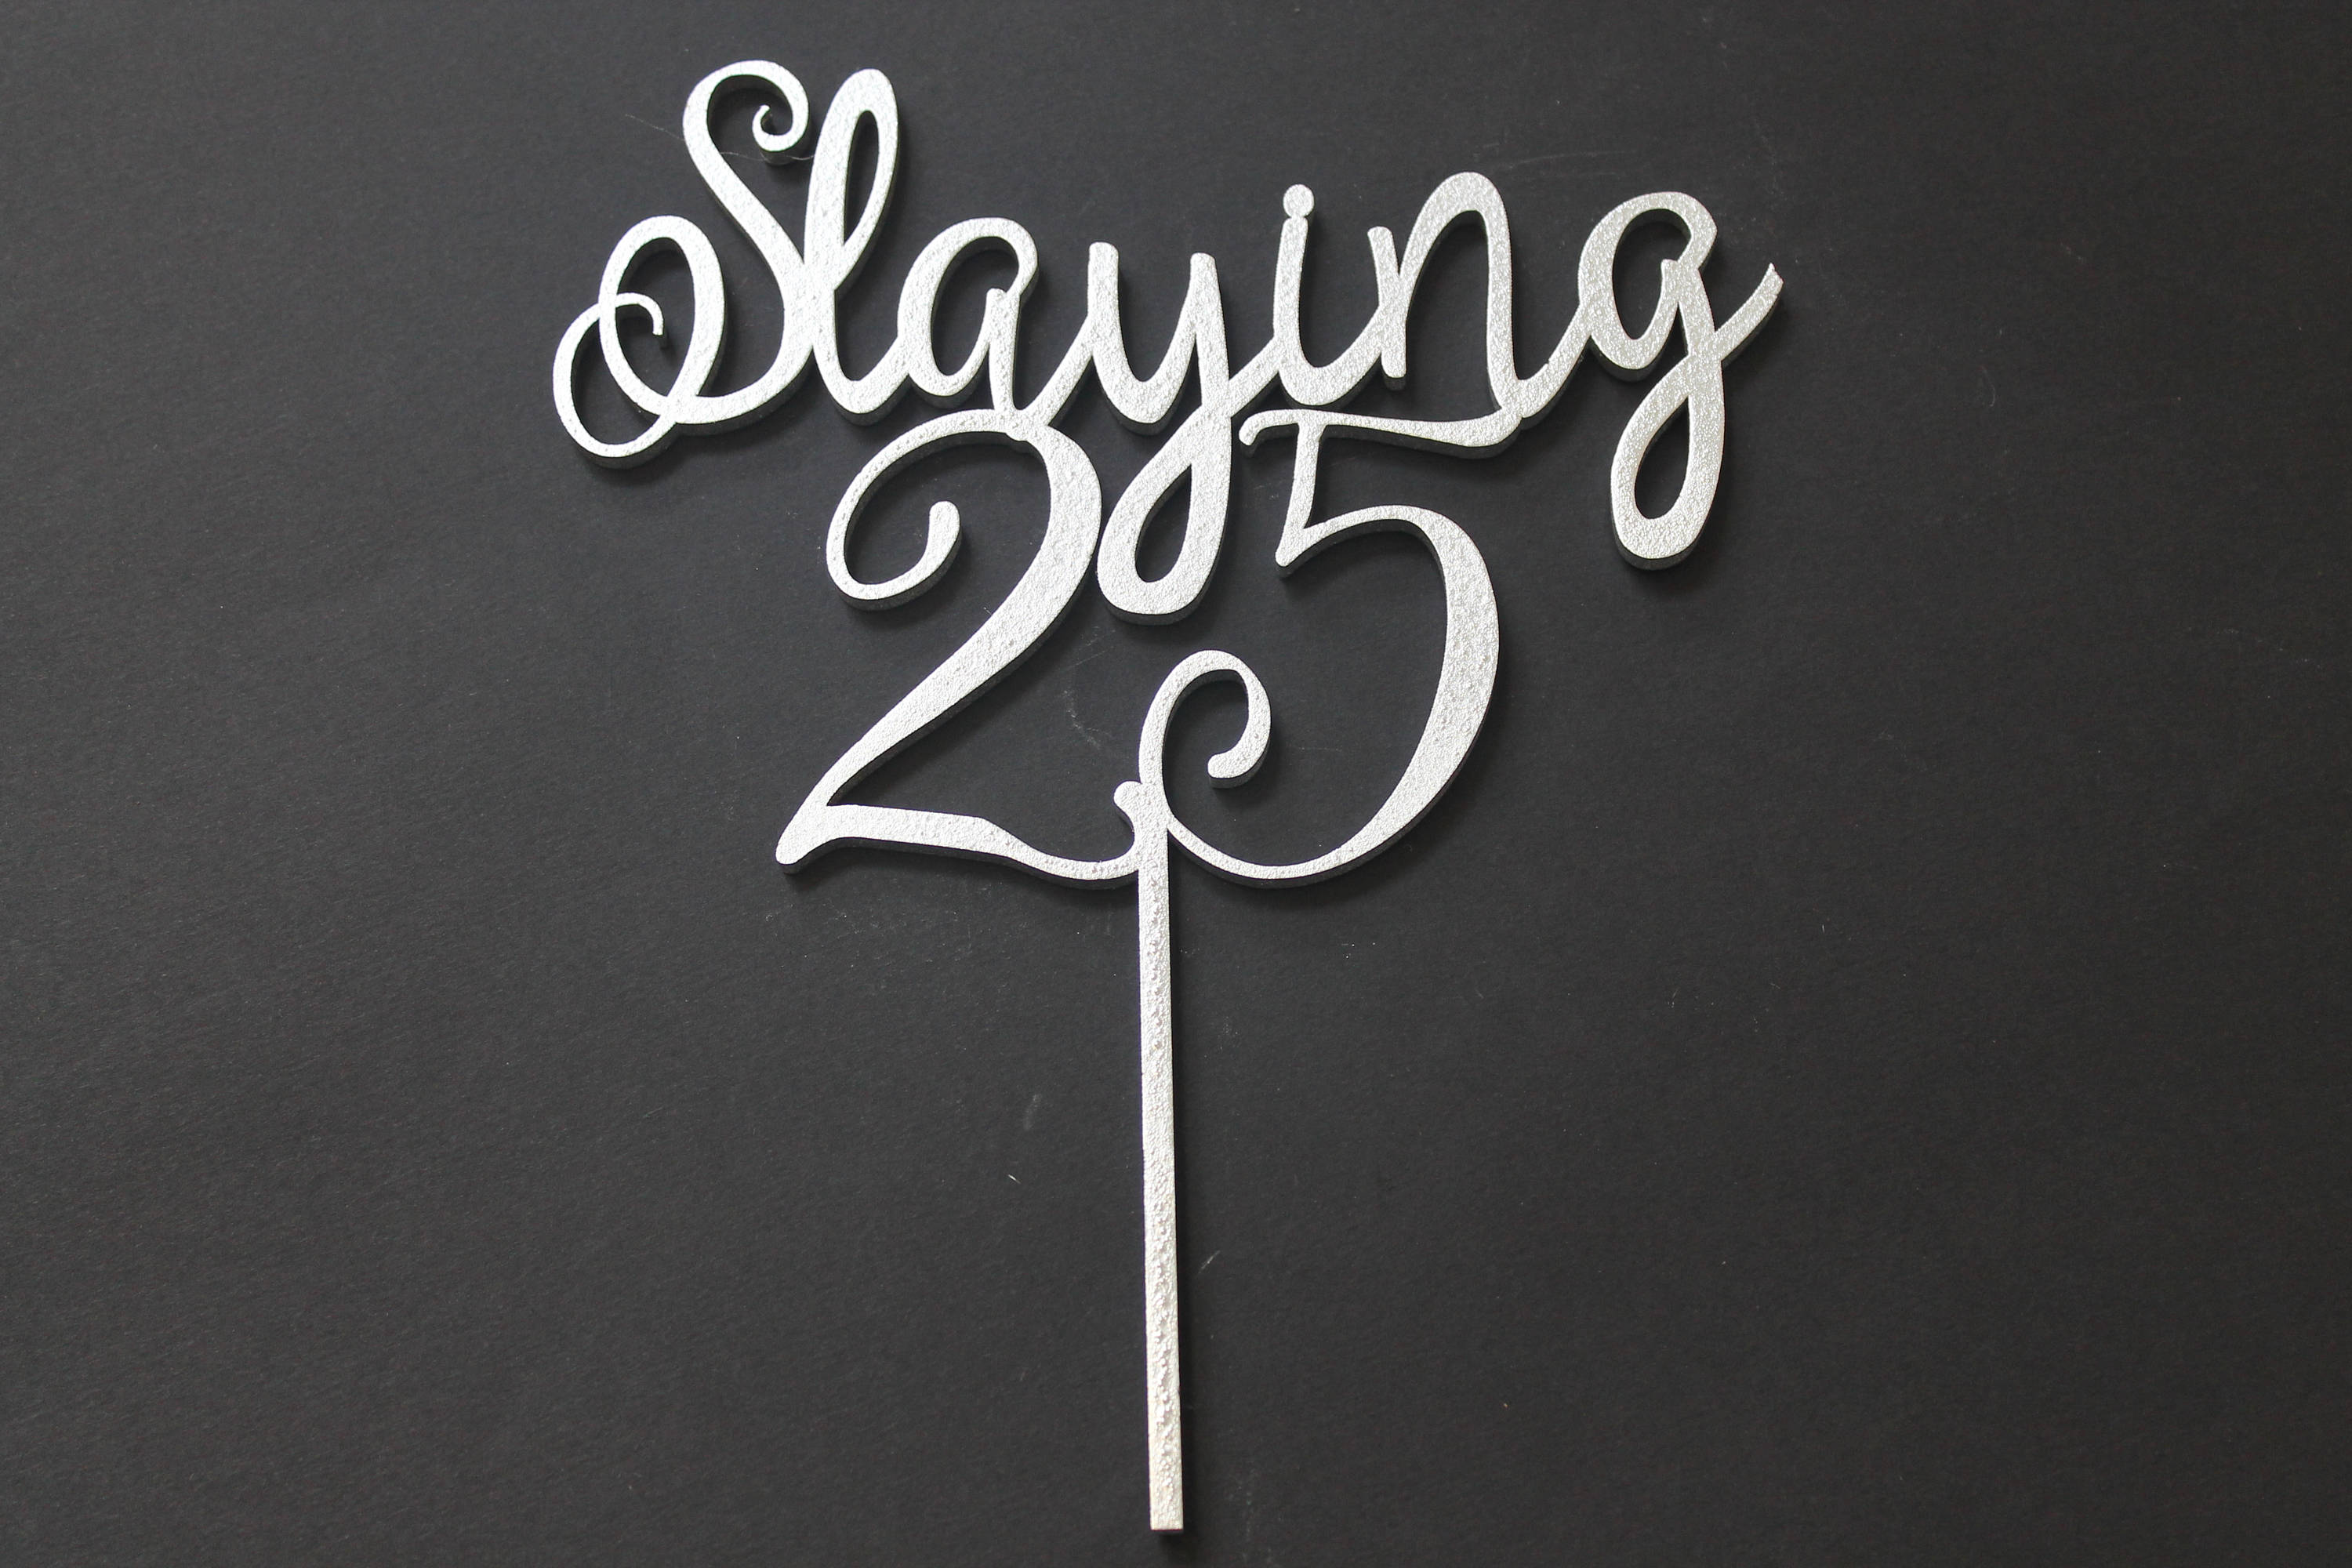 Slaying 25 Cake Topper Birthday Party Slaying 18, 21, 30, Any Age